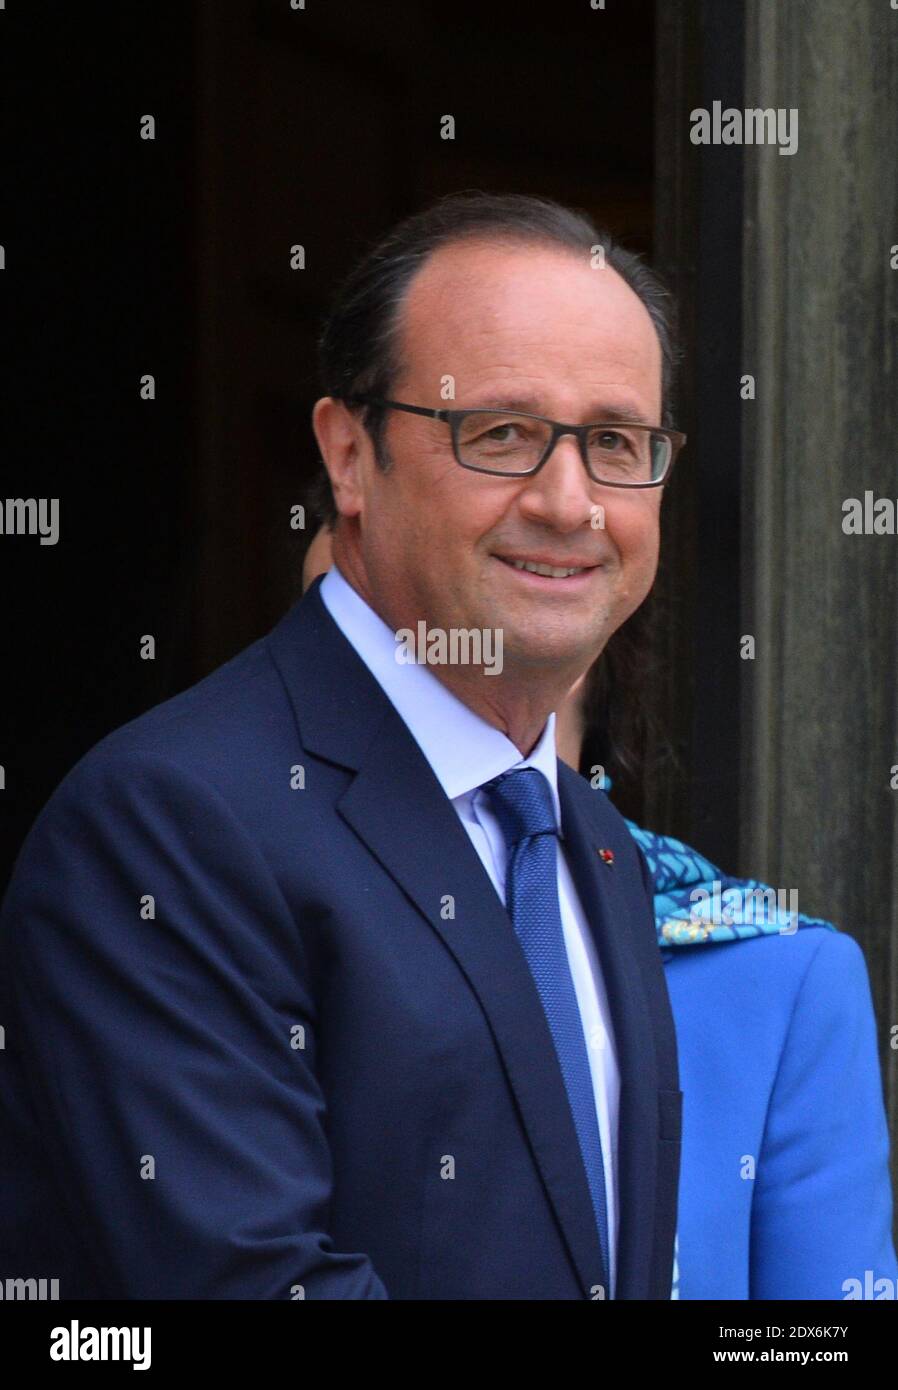 President Francois Hollande leaving the Elysee presidential palace in Paris, France after a weekly cabinet meeting. French President Francois Hollande on August 27 installed a former banker and ally as economy minister in an emergency reshuffle seen as the 'last chance' to haul France out of the biggest crisis of his presidency. Hollande caught everyone off guard with the appointment of Emmanuel Macron, a 36-year-old ex-Rothschild banker and architect of the president's economic policy. Photo by Christian Liewig/ABACAPRESS.COM Stock Photo